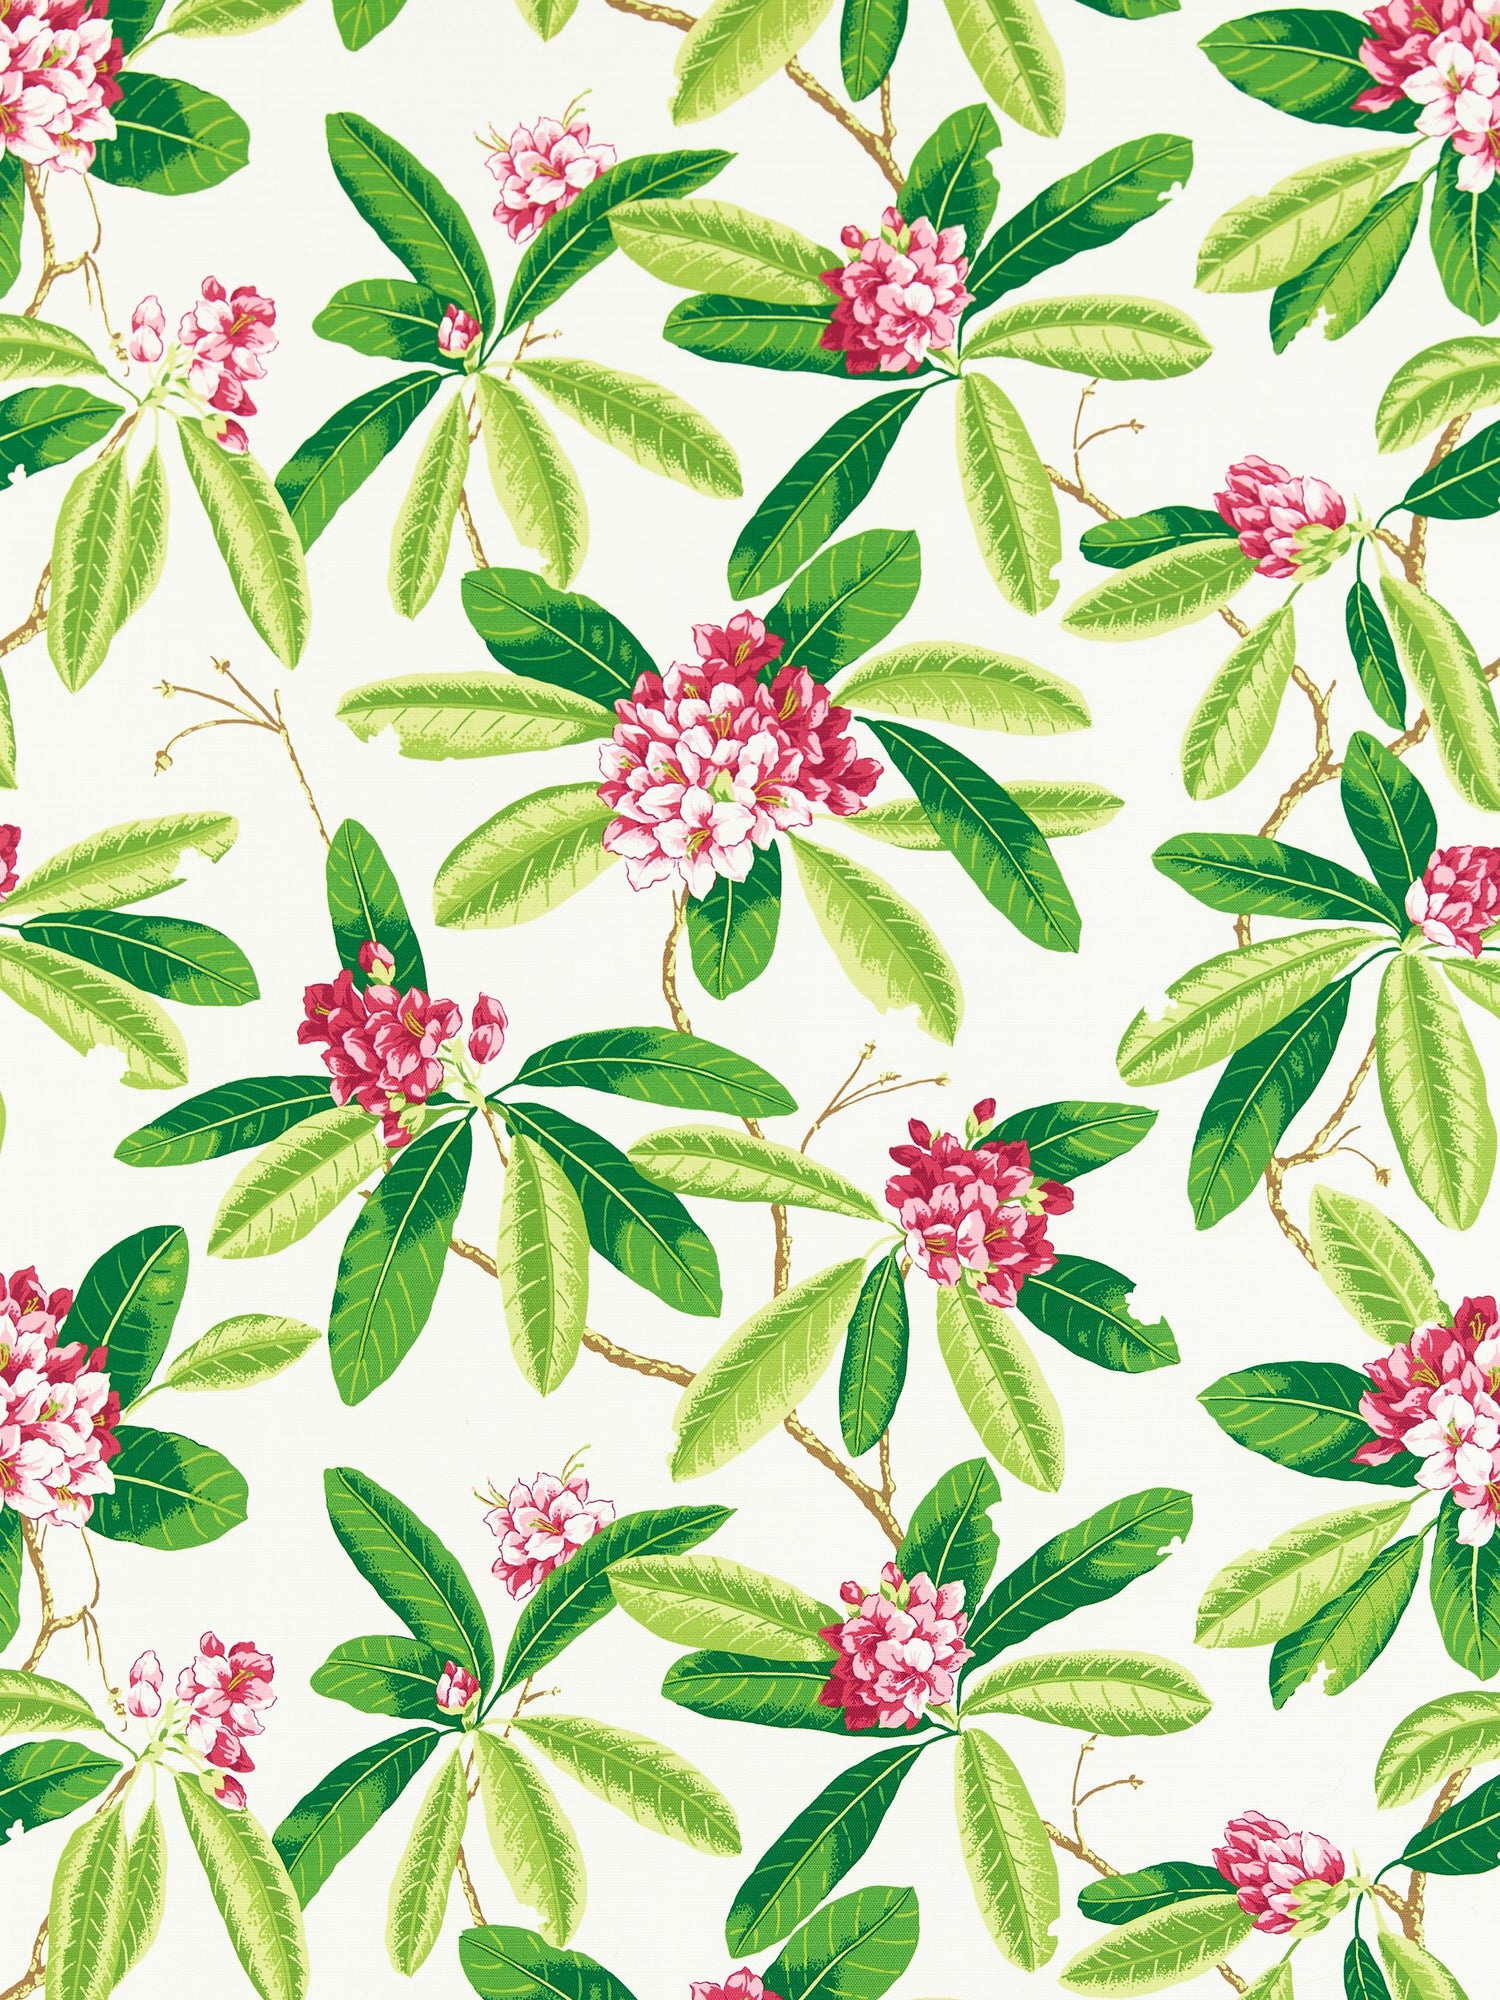 Rhododendron Outdoor fabric in fuschia color - pattern number SC 000116454M - by Scalamandre in the Scalamandre Fabrics Book 1 collection